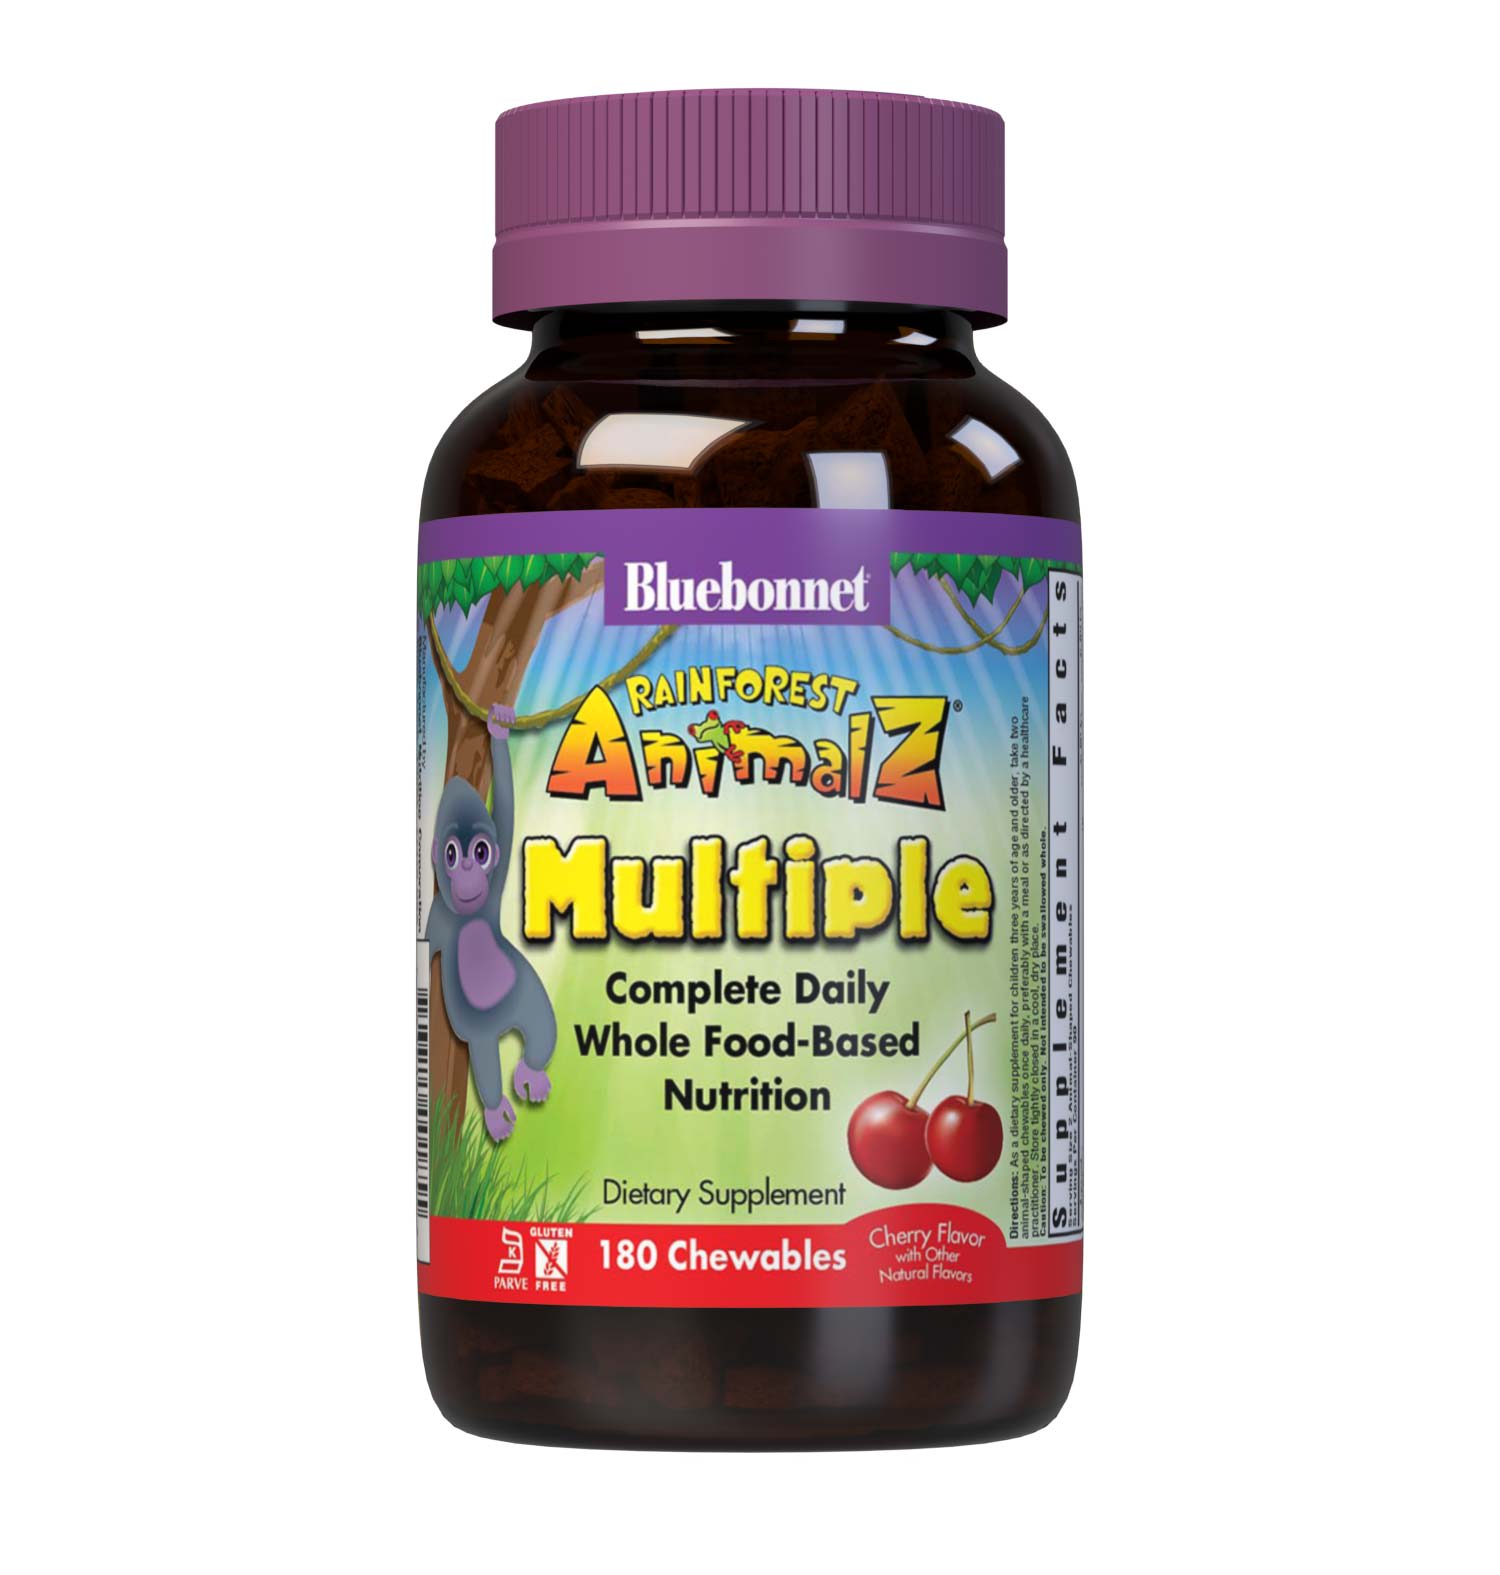 Bluebonnet Rainforest Animalz Whole Food Based Multiple 180 Animal-Shaped Chewables helps bridge the nutrient gap by providing a comprehensive blend of super fruits and veggies that are rich in essential vitamins and minerals in tasty, delicious flavored chewable tablets to support their growth and developmental needs. #size_180 count